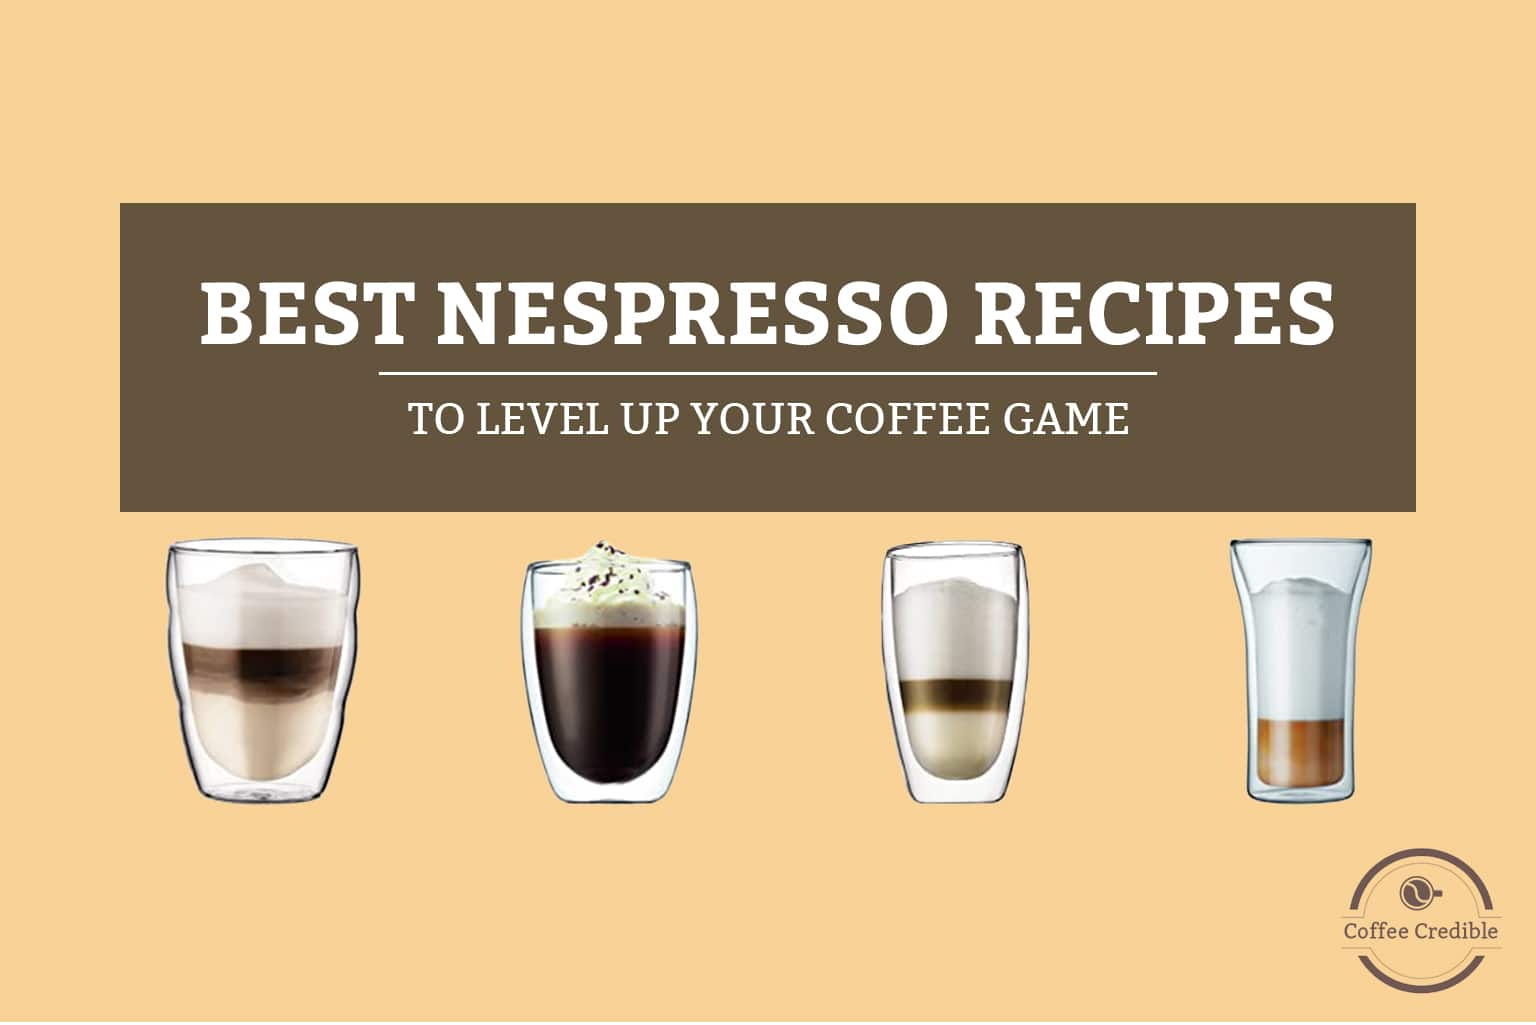 14 Best Nespresso Recipes To Level Up Your Coffee Game